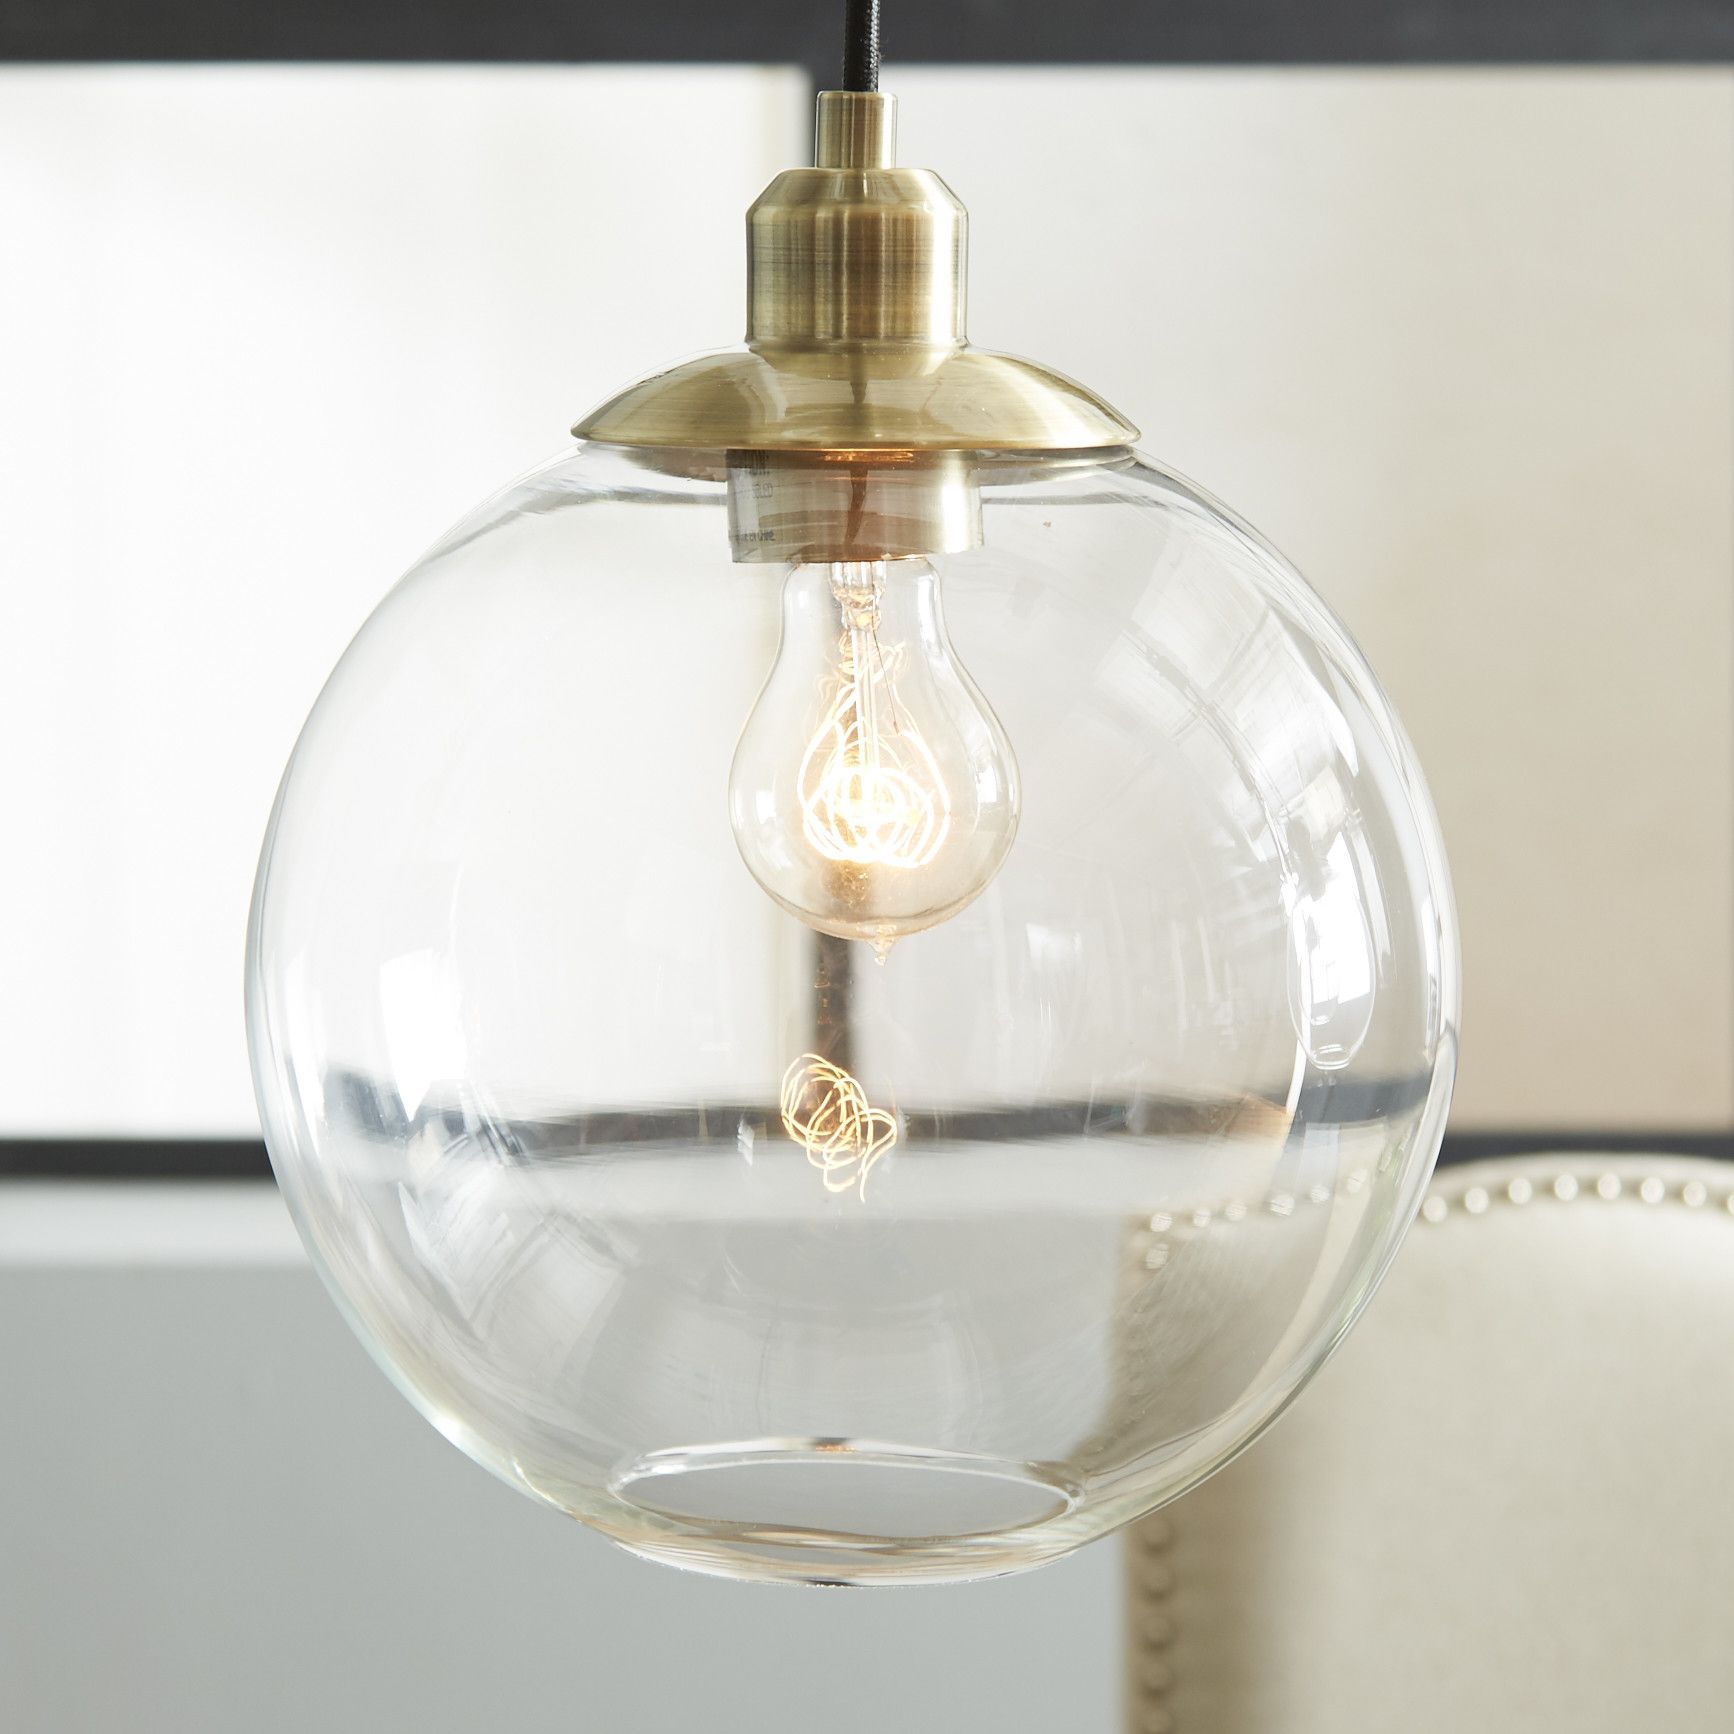 Gehry 1 Light Glass Pendant In 2018 | Minneapolis House With Gehry 1 Light Single Globe Pendants (View 13 of 30)